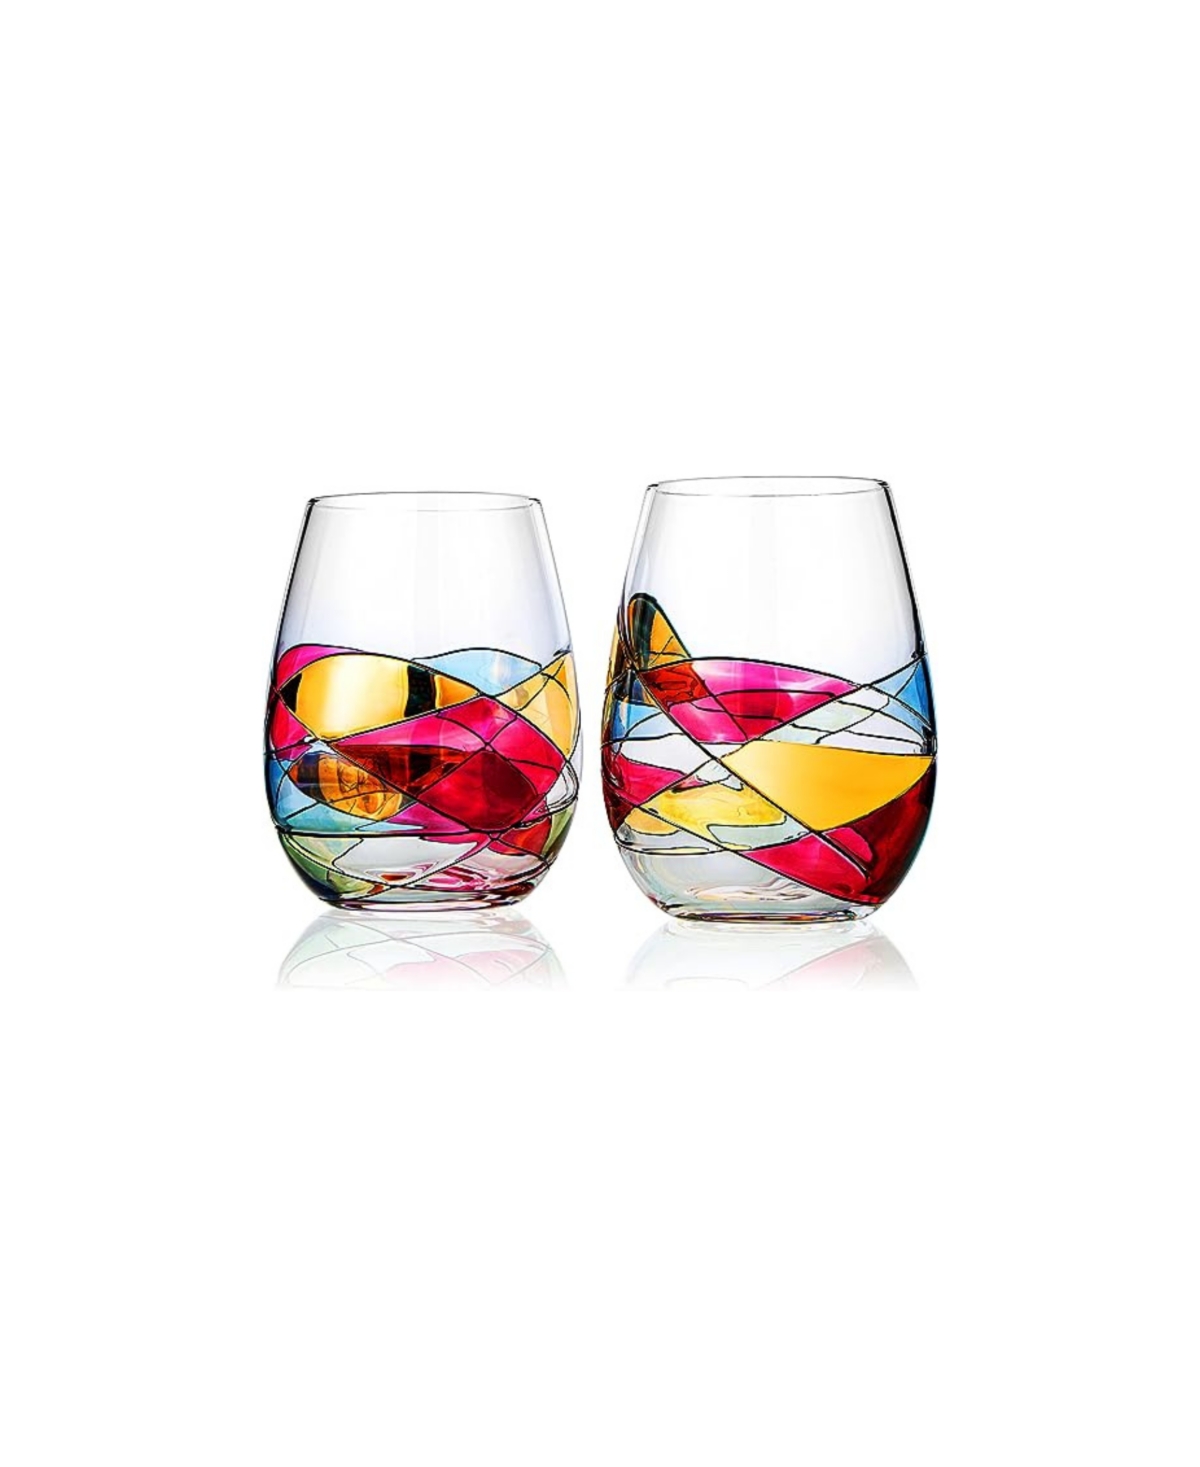 The Wine Savant Artisanal Hand Painted Stemless Wine Glasses, Set Of 2 In Multicolor